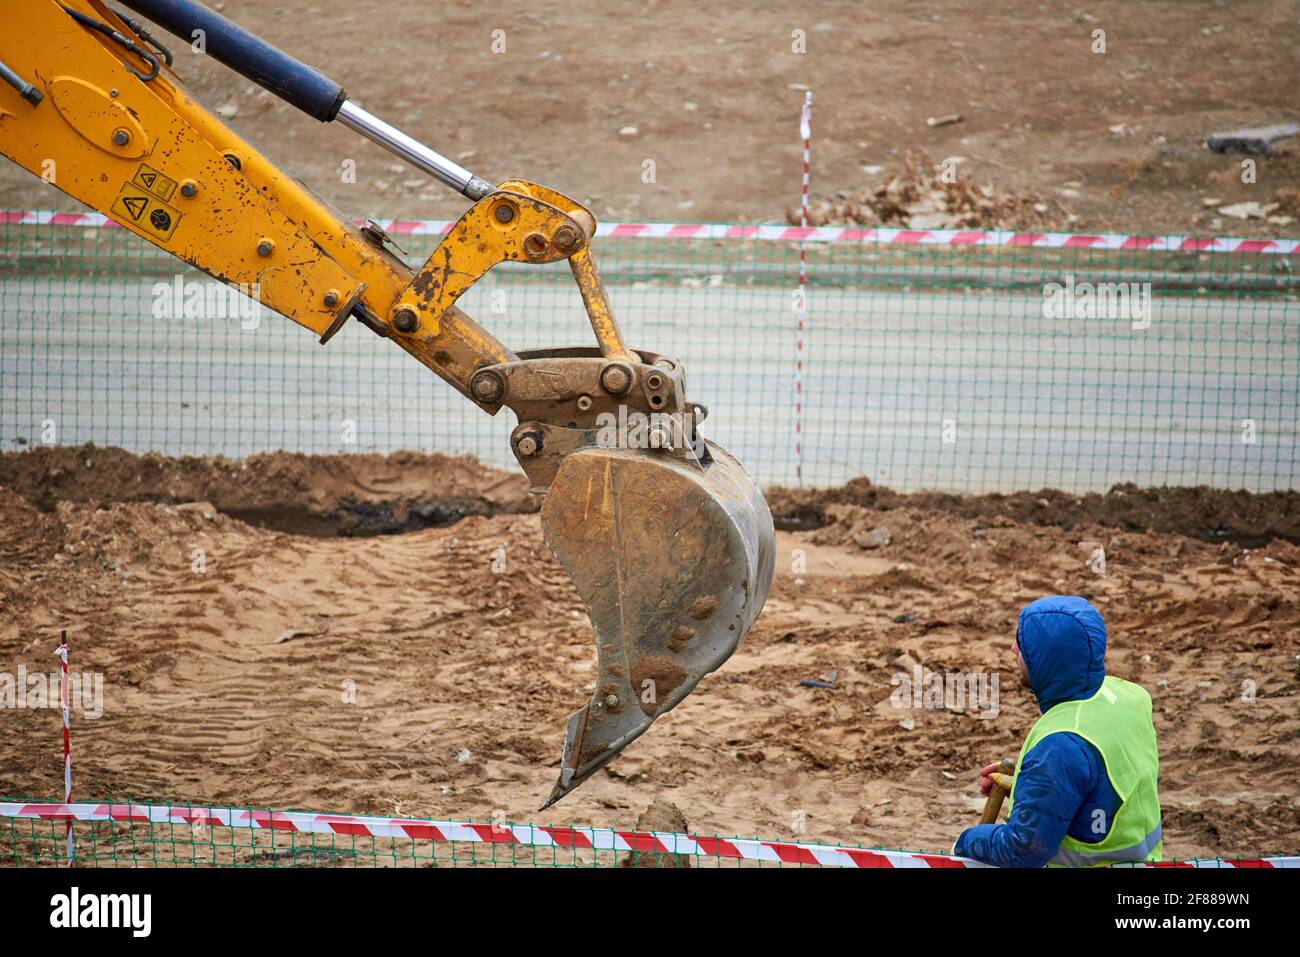 Astrakhan, Russia - 02.15.2021: A worker in a blue jacket and green signal vest he watches the backhoe bucket dig into the ground Stock Photo